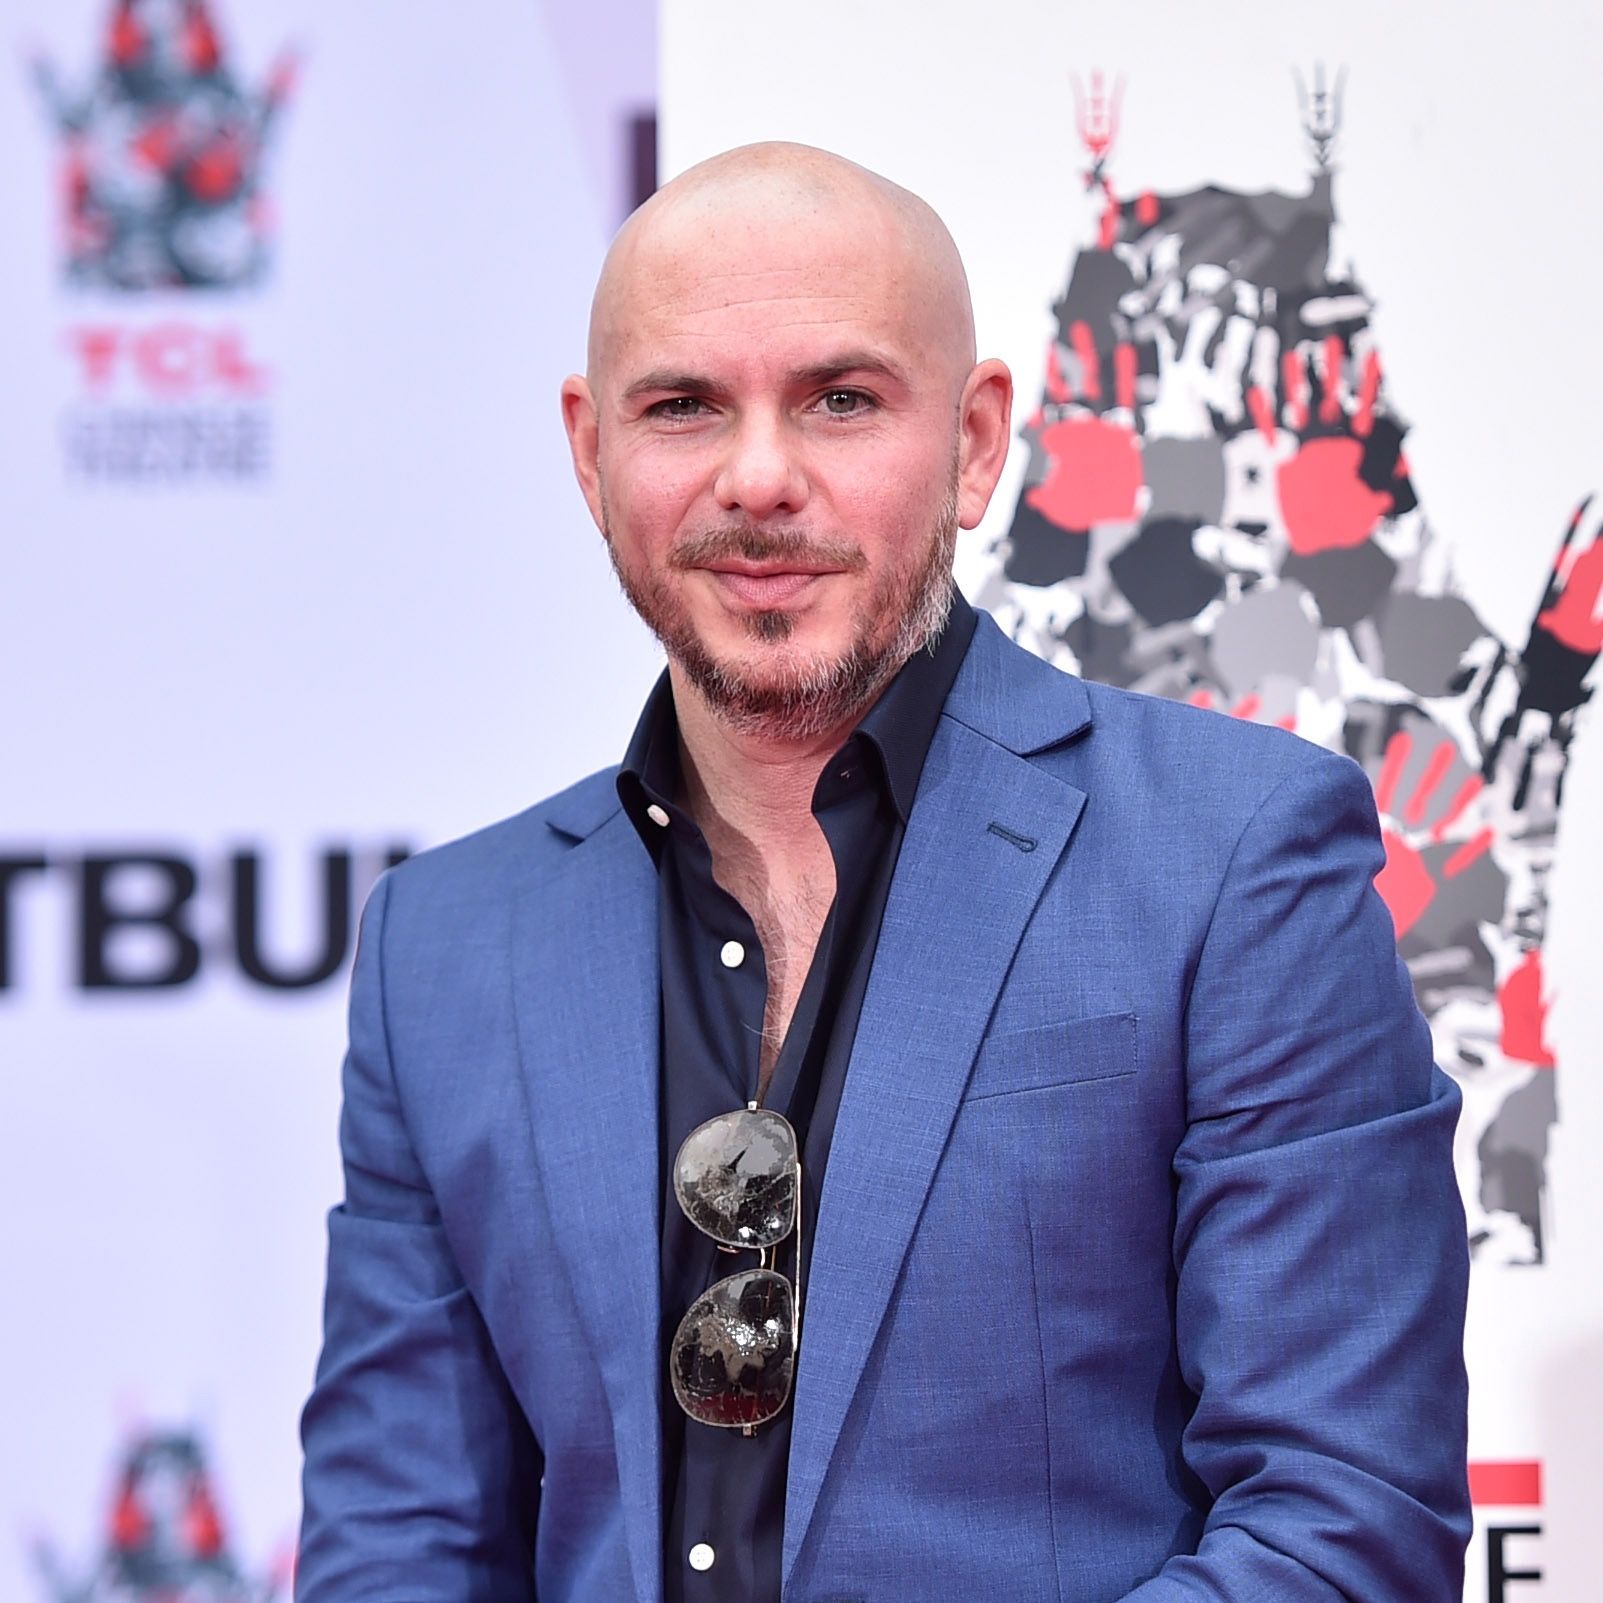 Singer Pitbull with Hair All Hairstyles Of His  Bald actors Pitbull  rapper Bald with beard